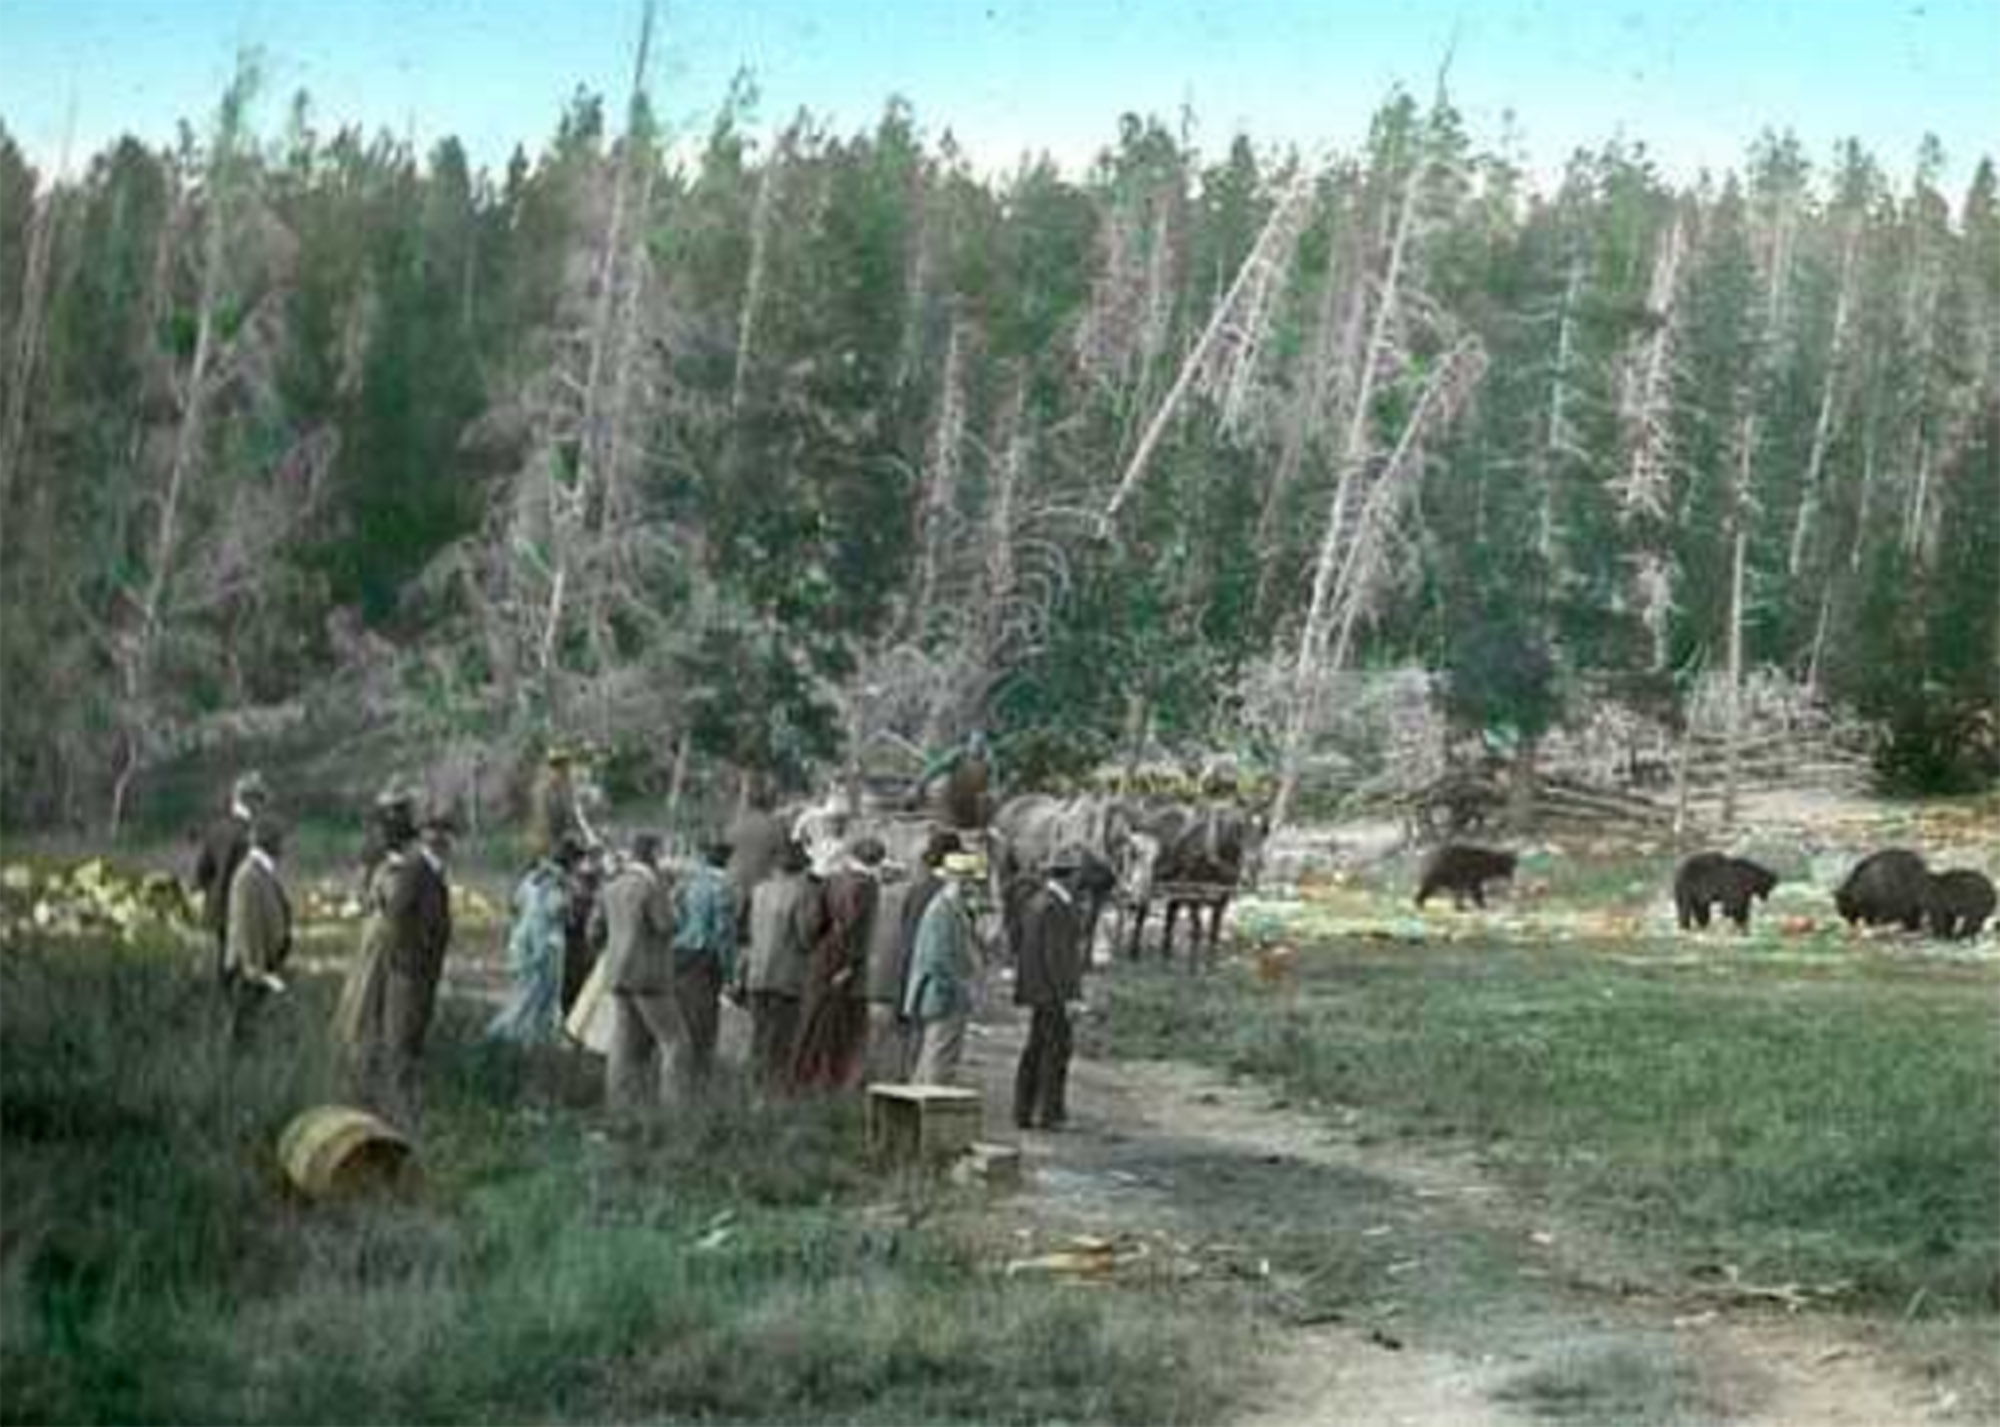 A painted slide of tourists watching bears eat at Yellowstone, sometime between the 1890s and 1910.
